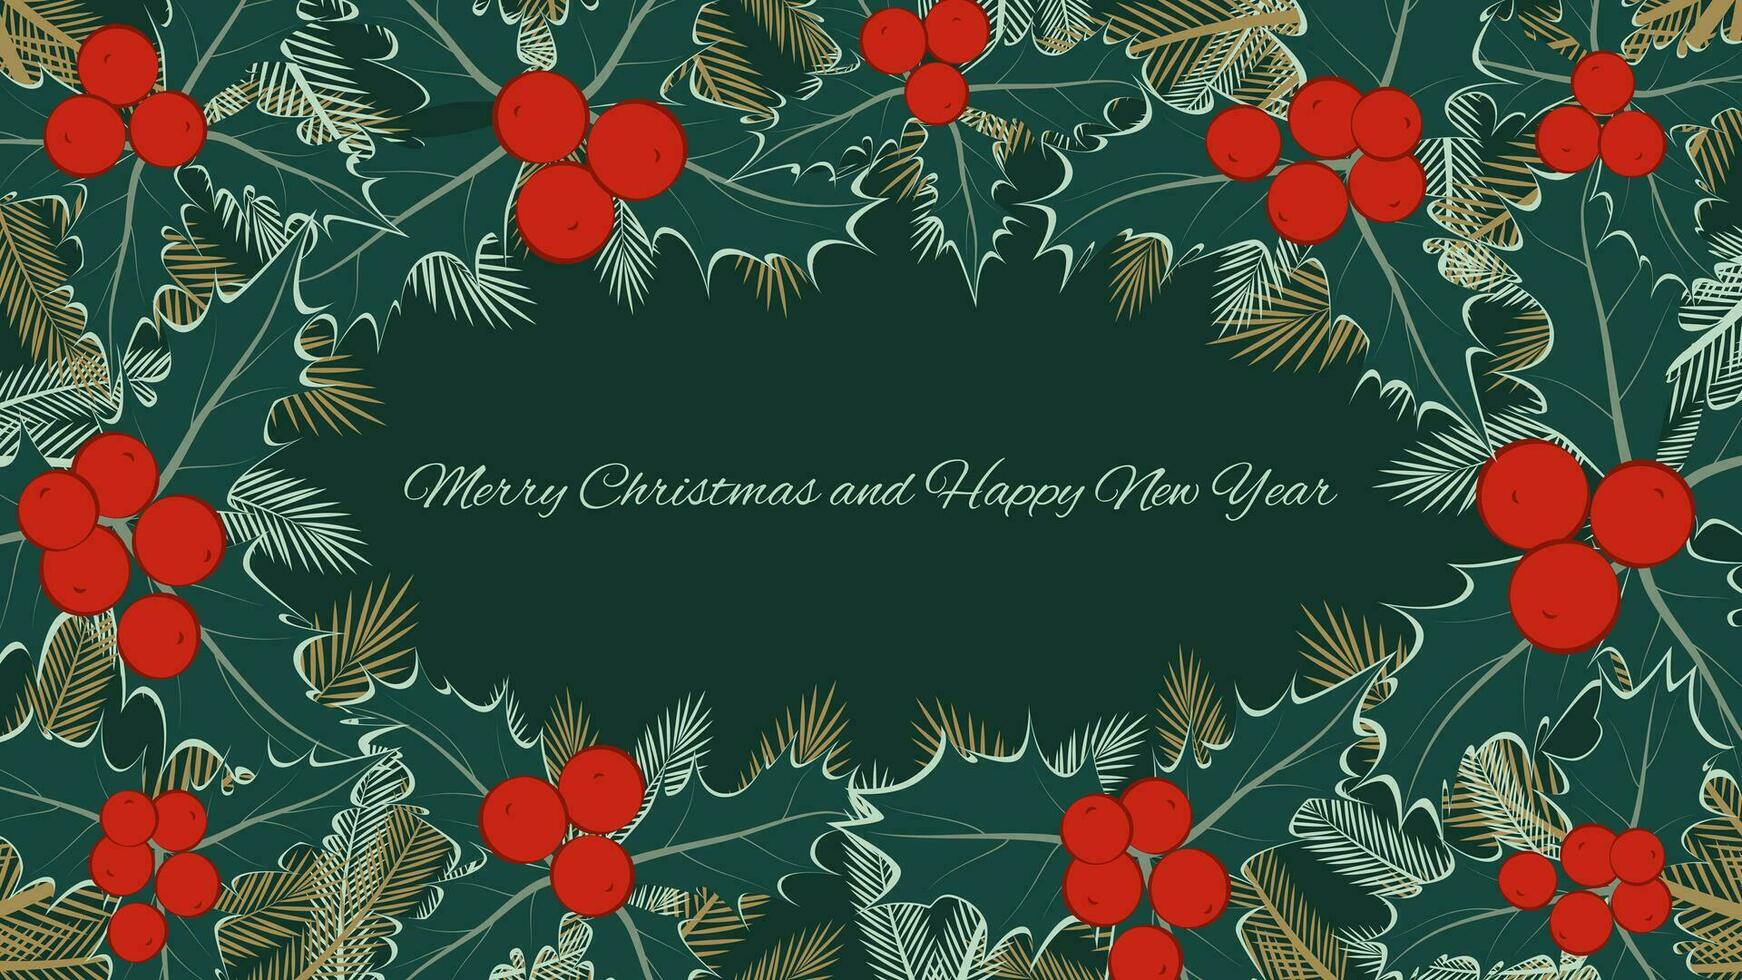 Holiday card with greetings Merry Christmas and Happy New Year in traditional green and red colors. Holly vector illustration.